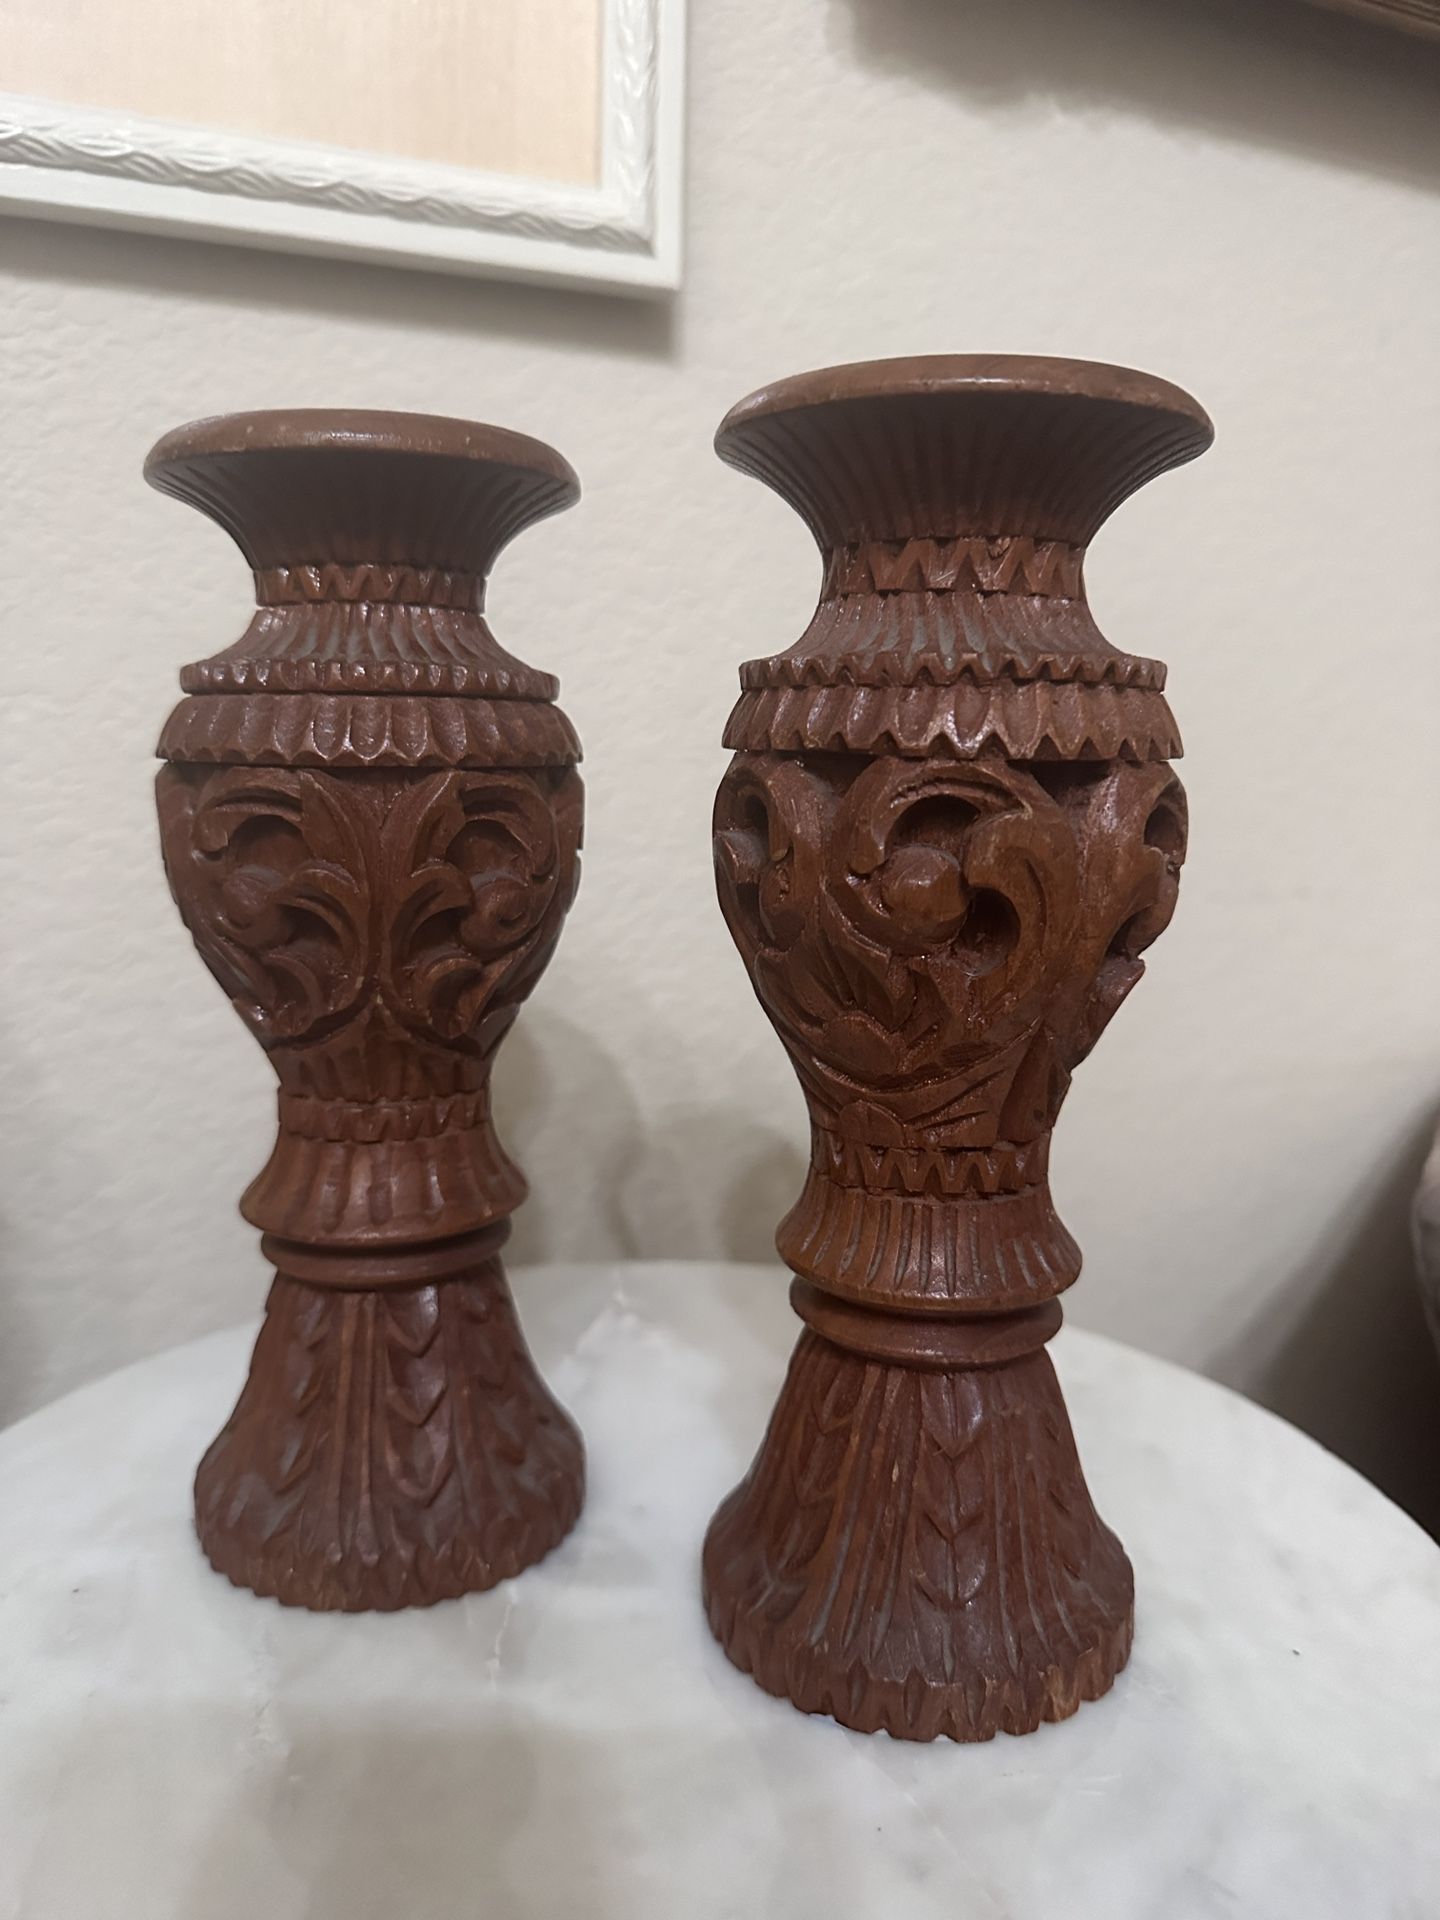 Candle Holders Made of Wood